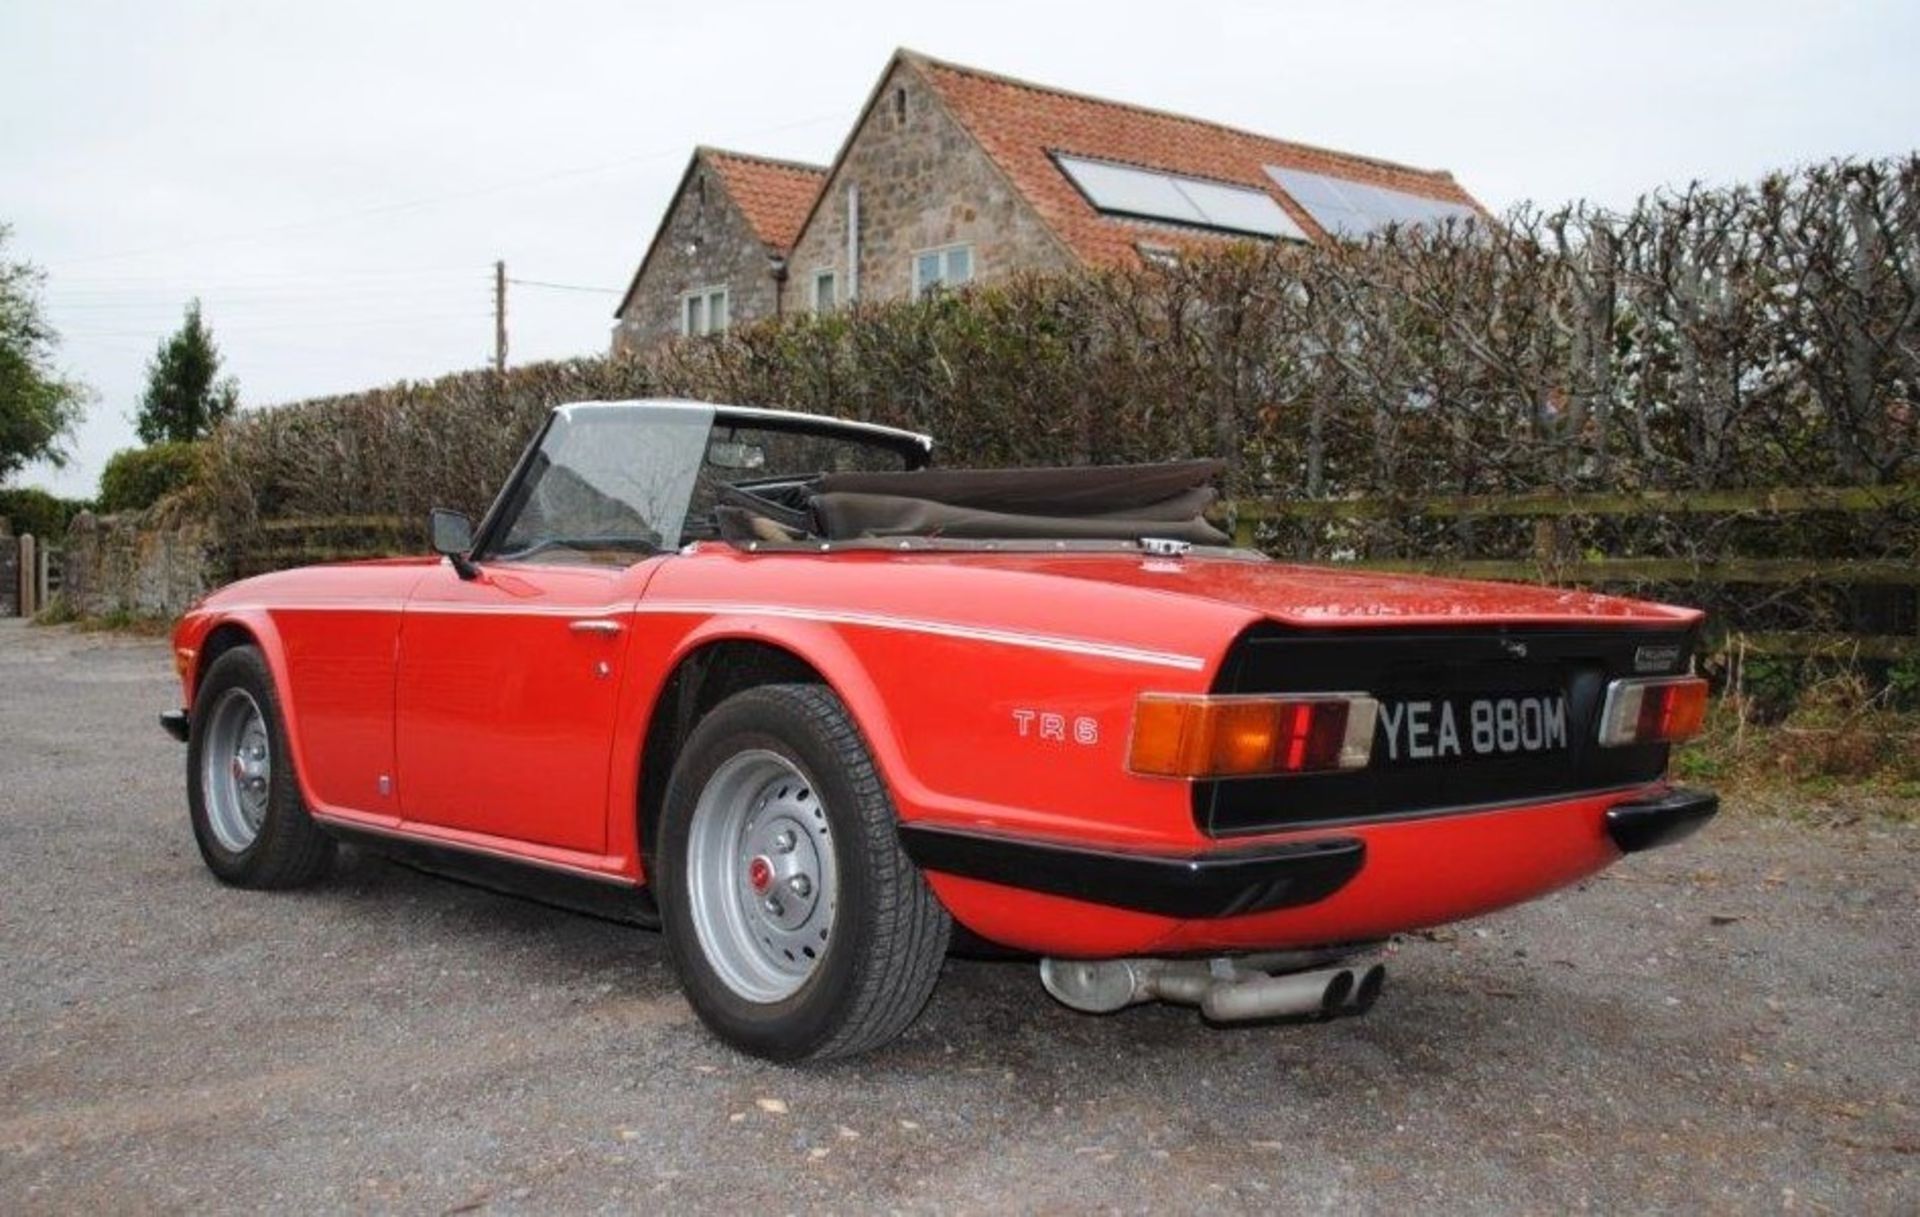 1974 TRIUMPH TR6 Registration Number: YEA 880M Chassis Number: CR51799 Recorded Mileage: 93,000 - Image 5 of 26